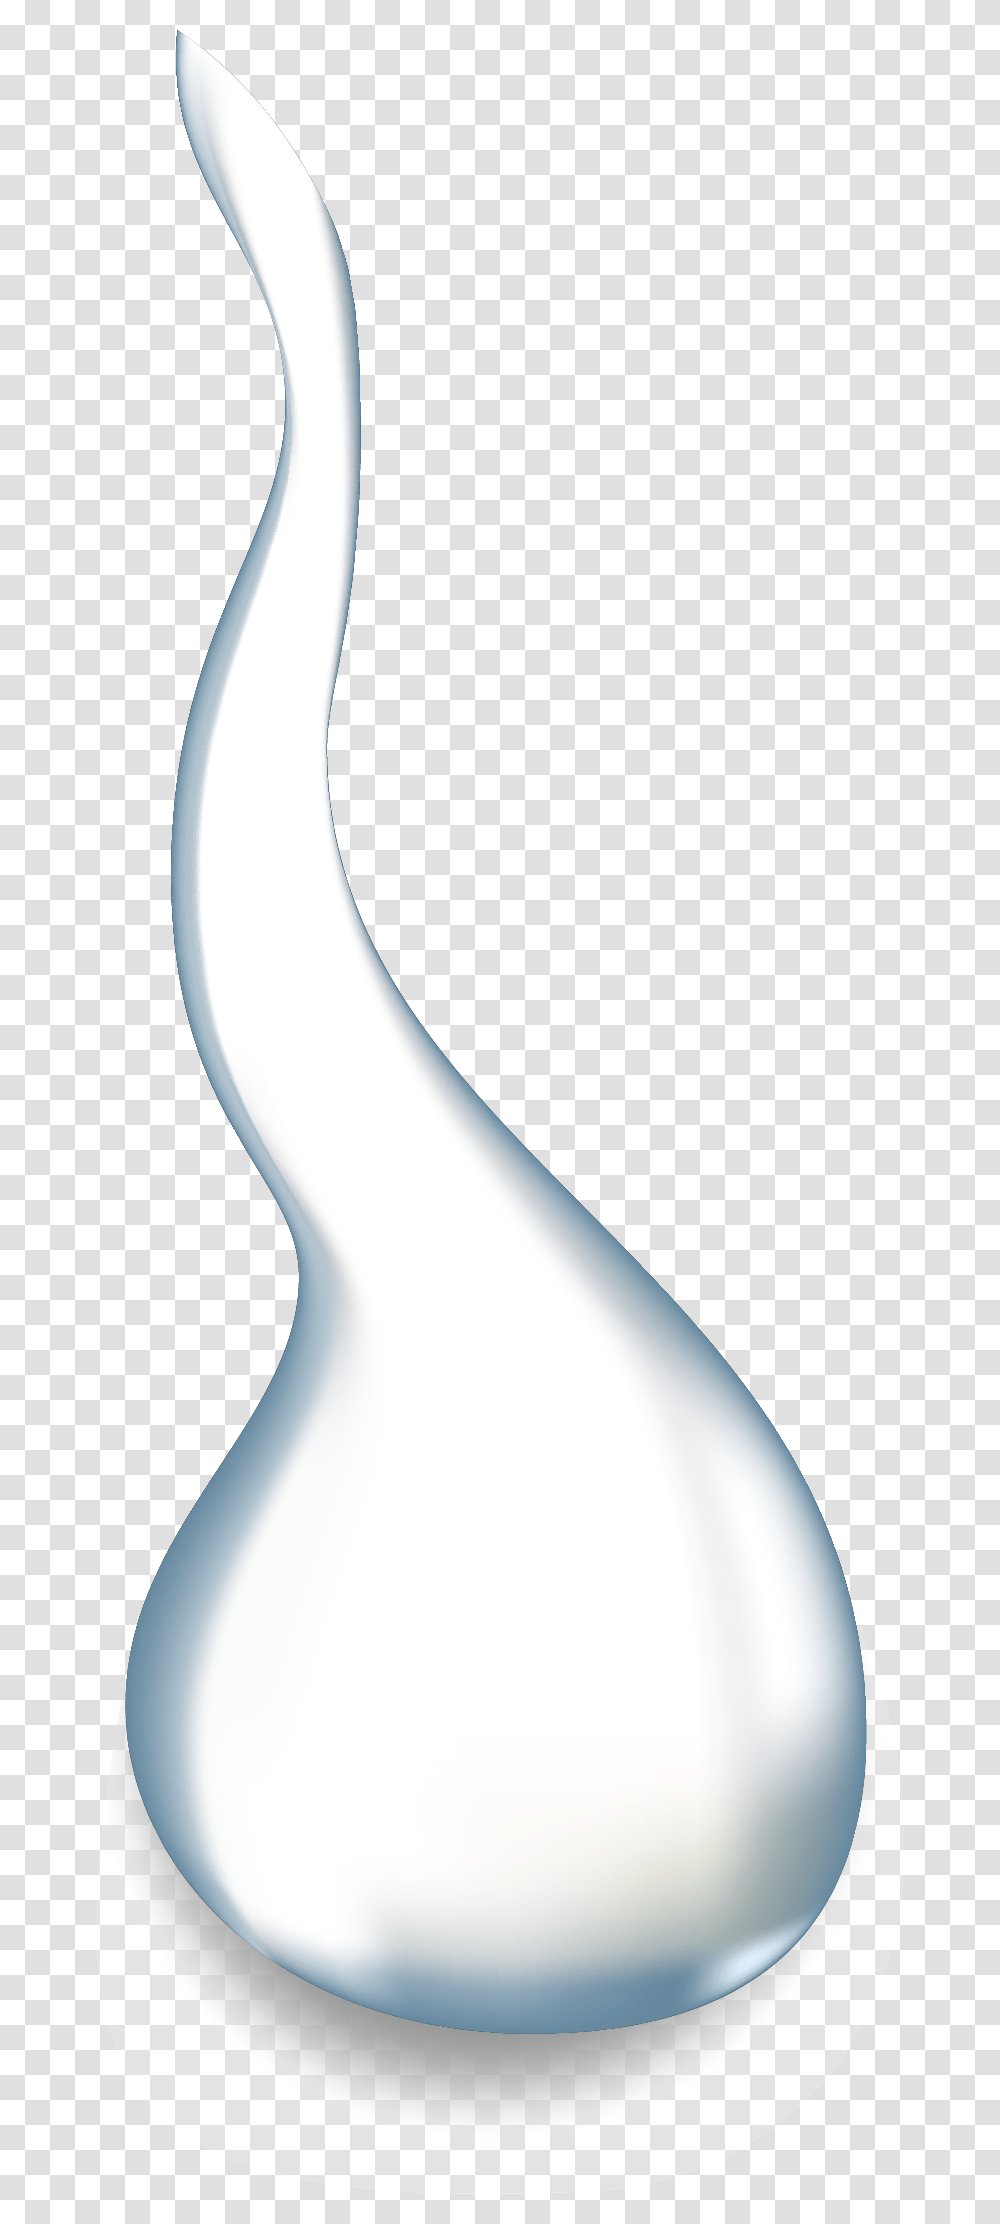 Electric Guitar, Spoon, Cutlery, Droplet Transparent Png